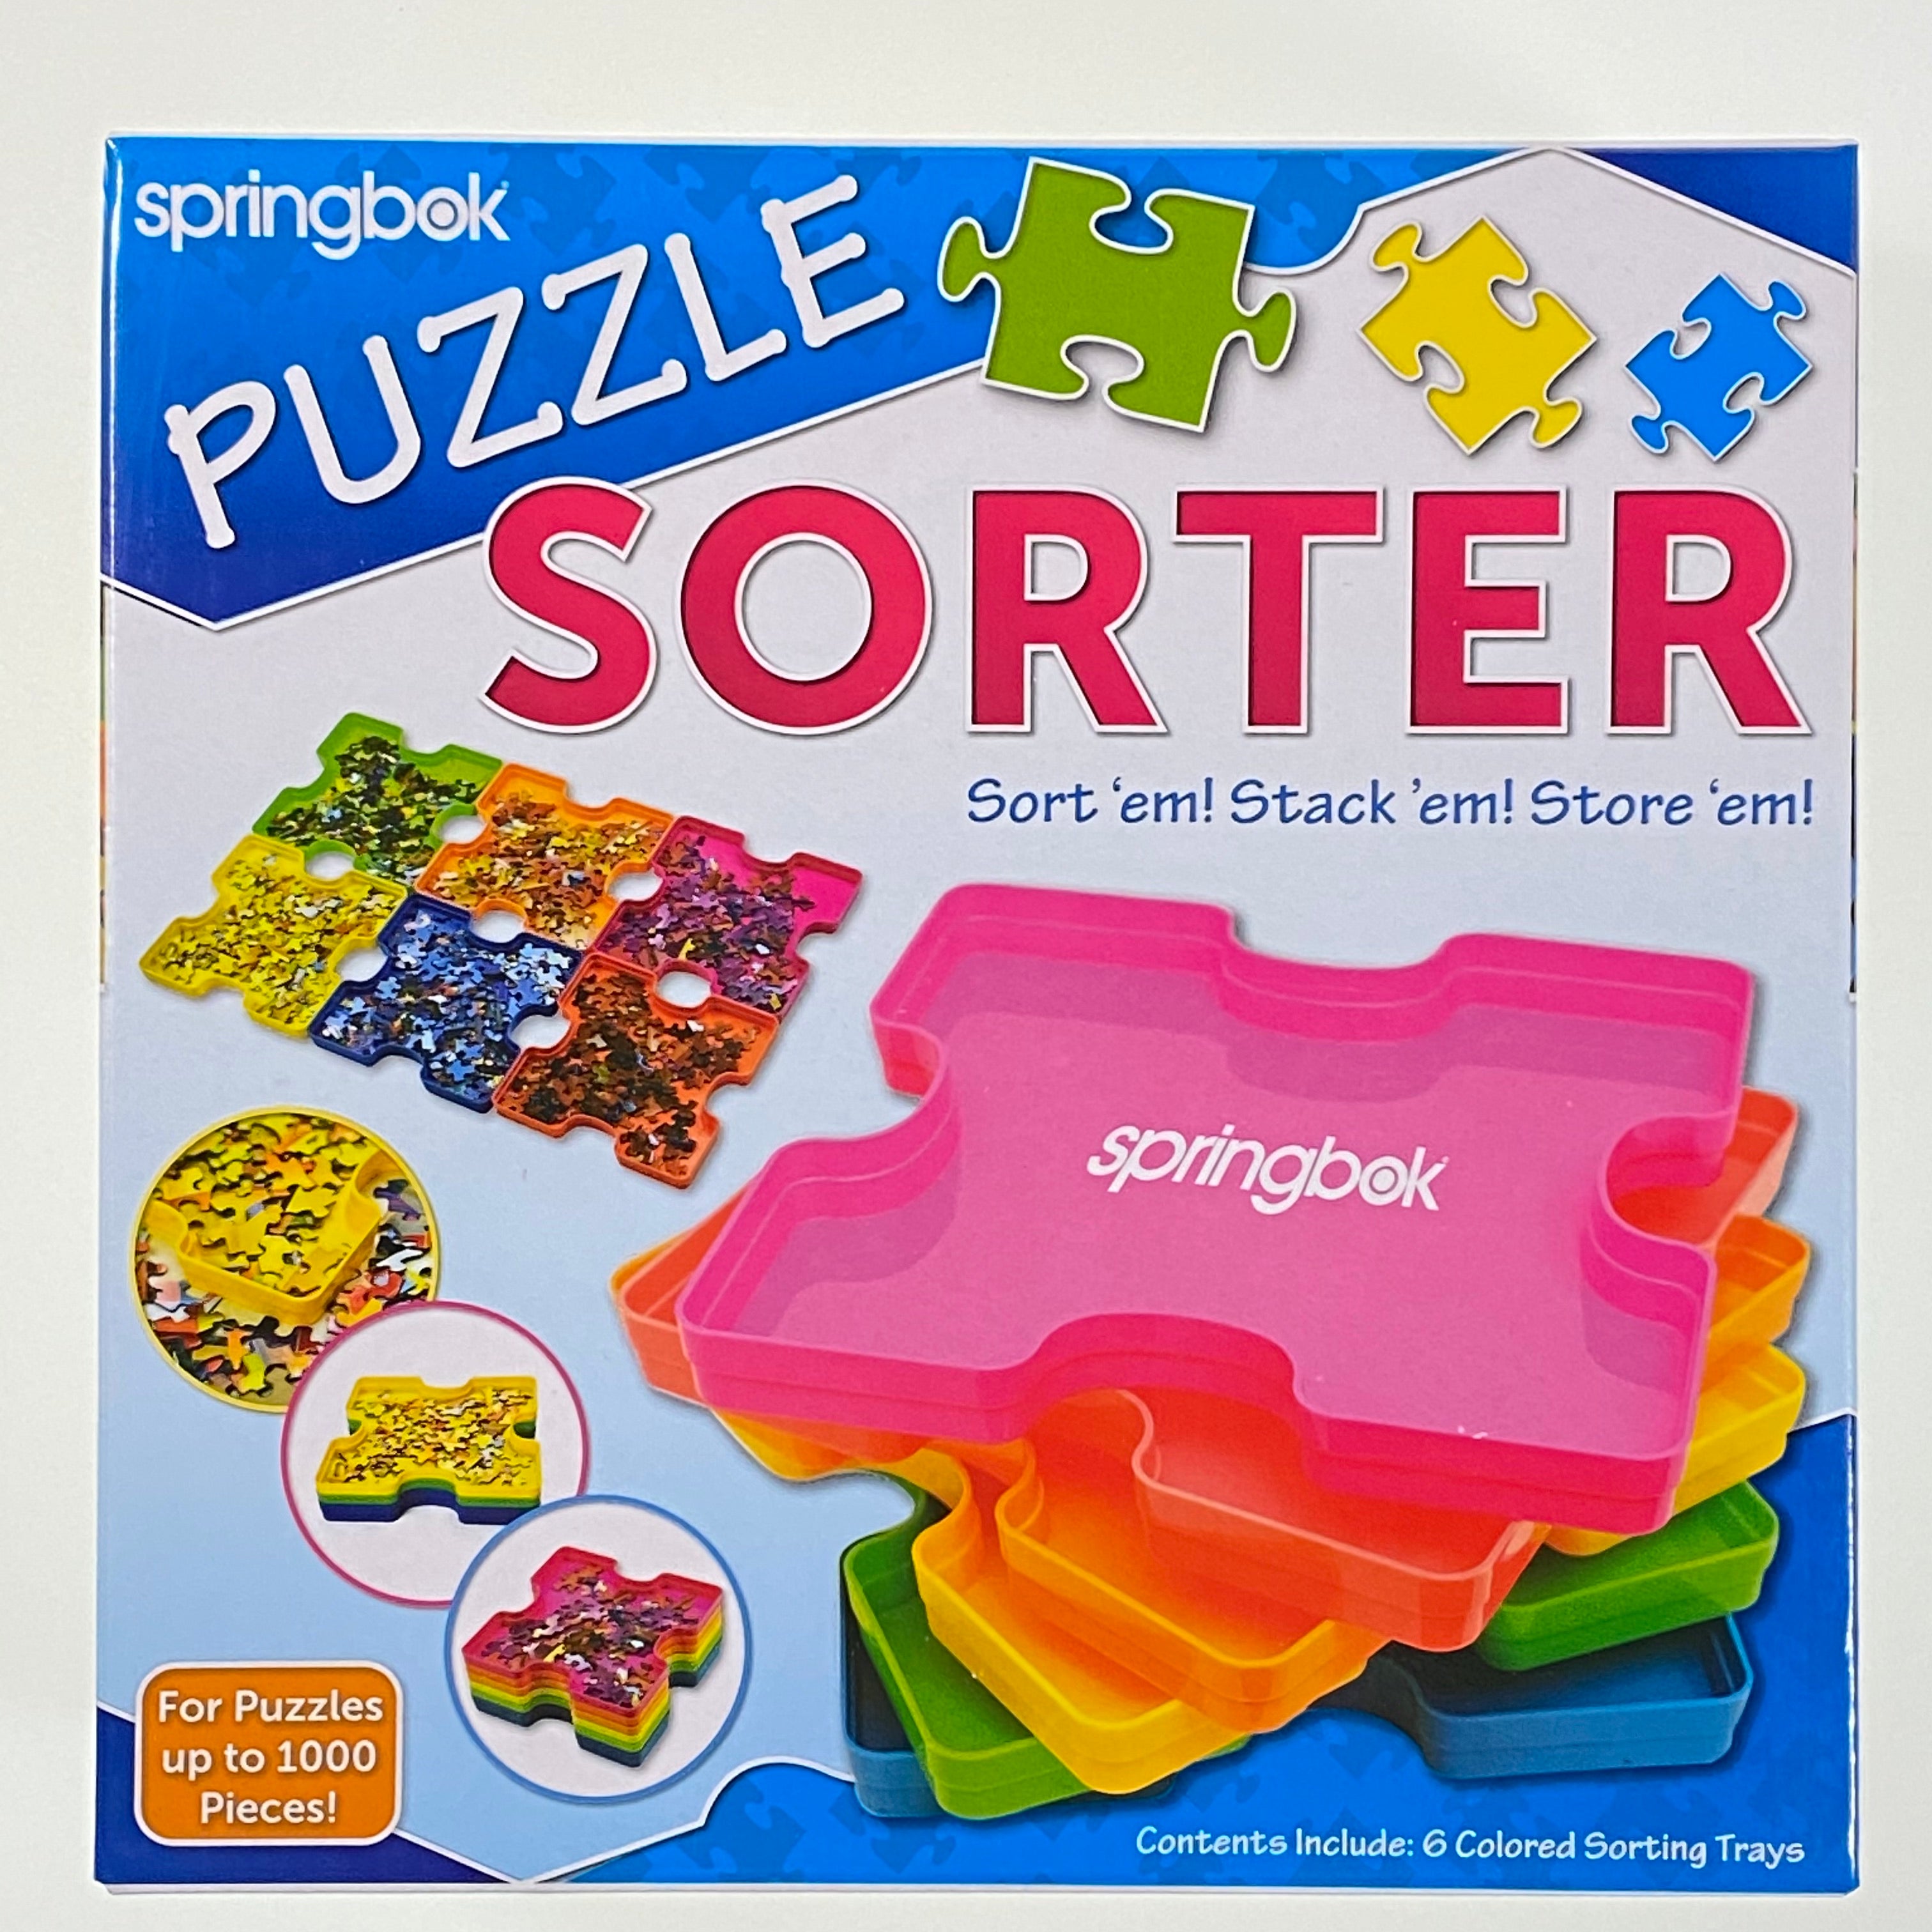 8 Puzzle Sorting Trays with Lid 10 x 10 inches - Jigsaw Puzzle